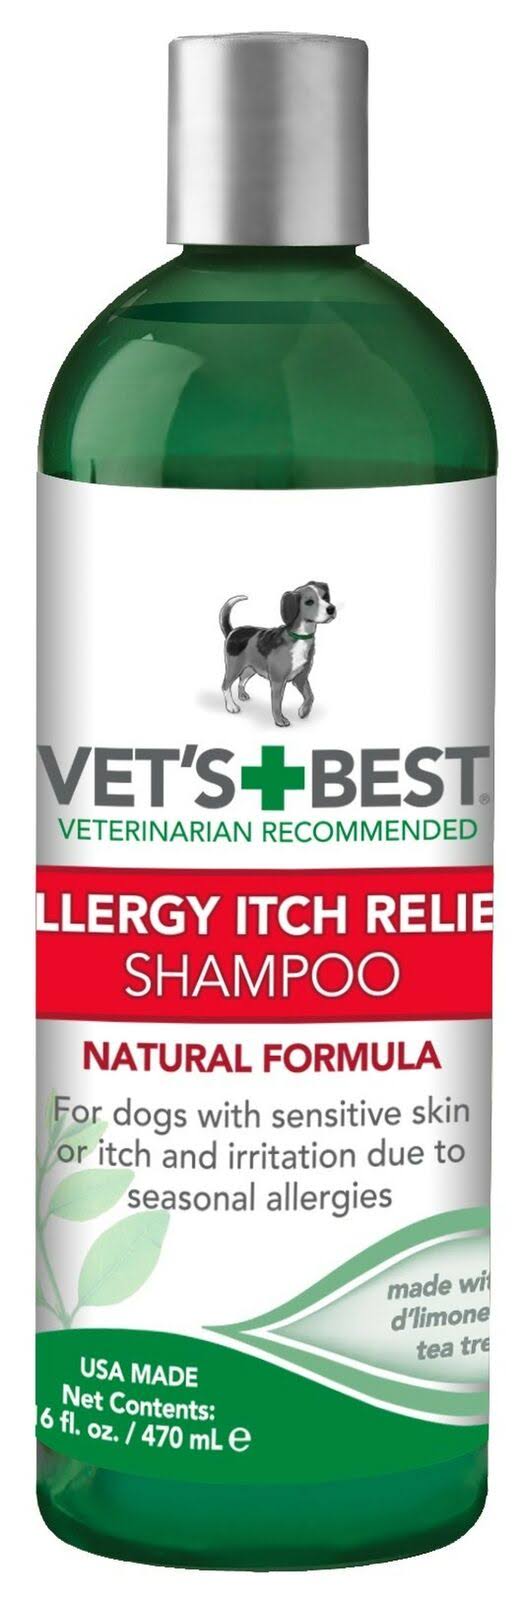 Vet's Best Allergy Itch Relief Dog Shampoo - 16oz